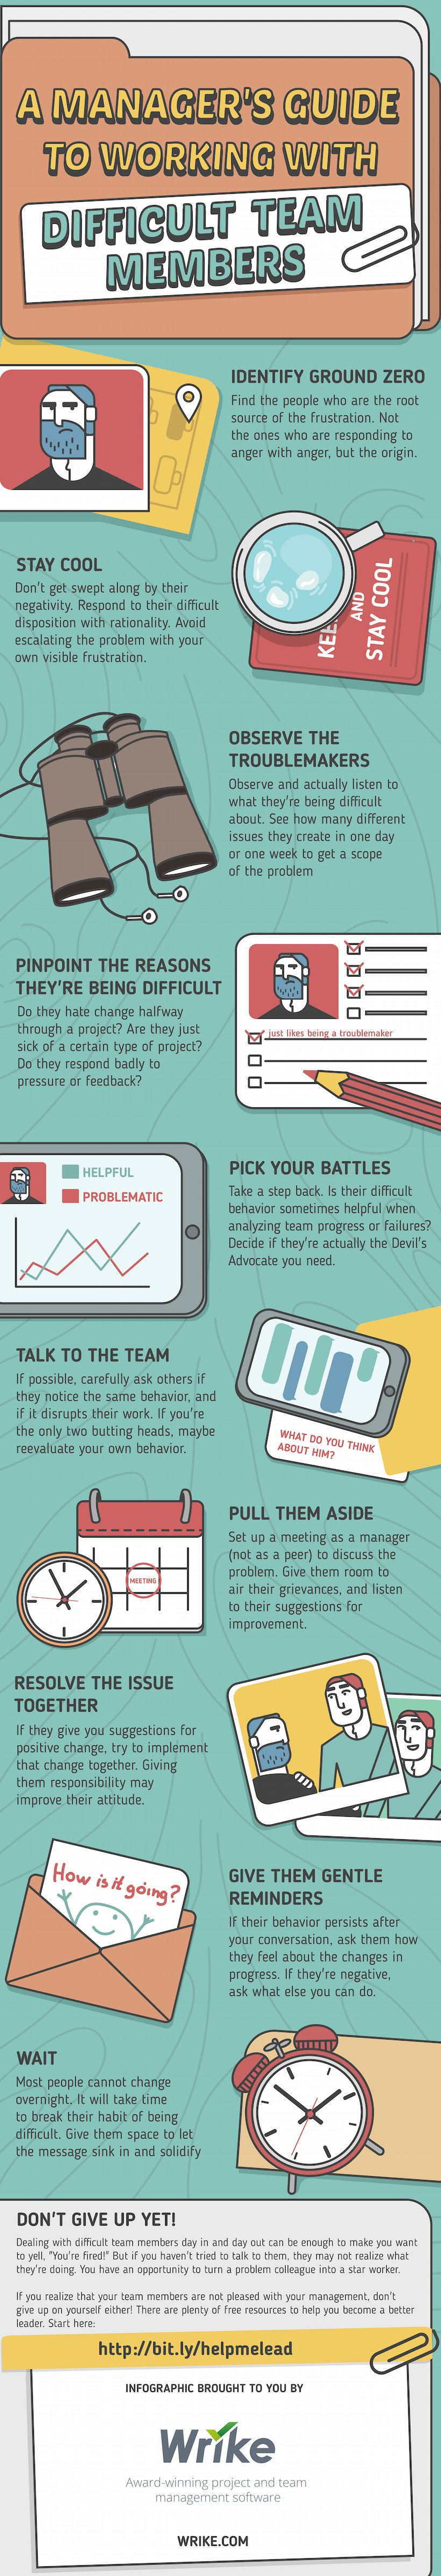 A Manager’s Guide to Working with Difficult Team Members (Infographic)